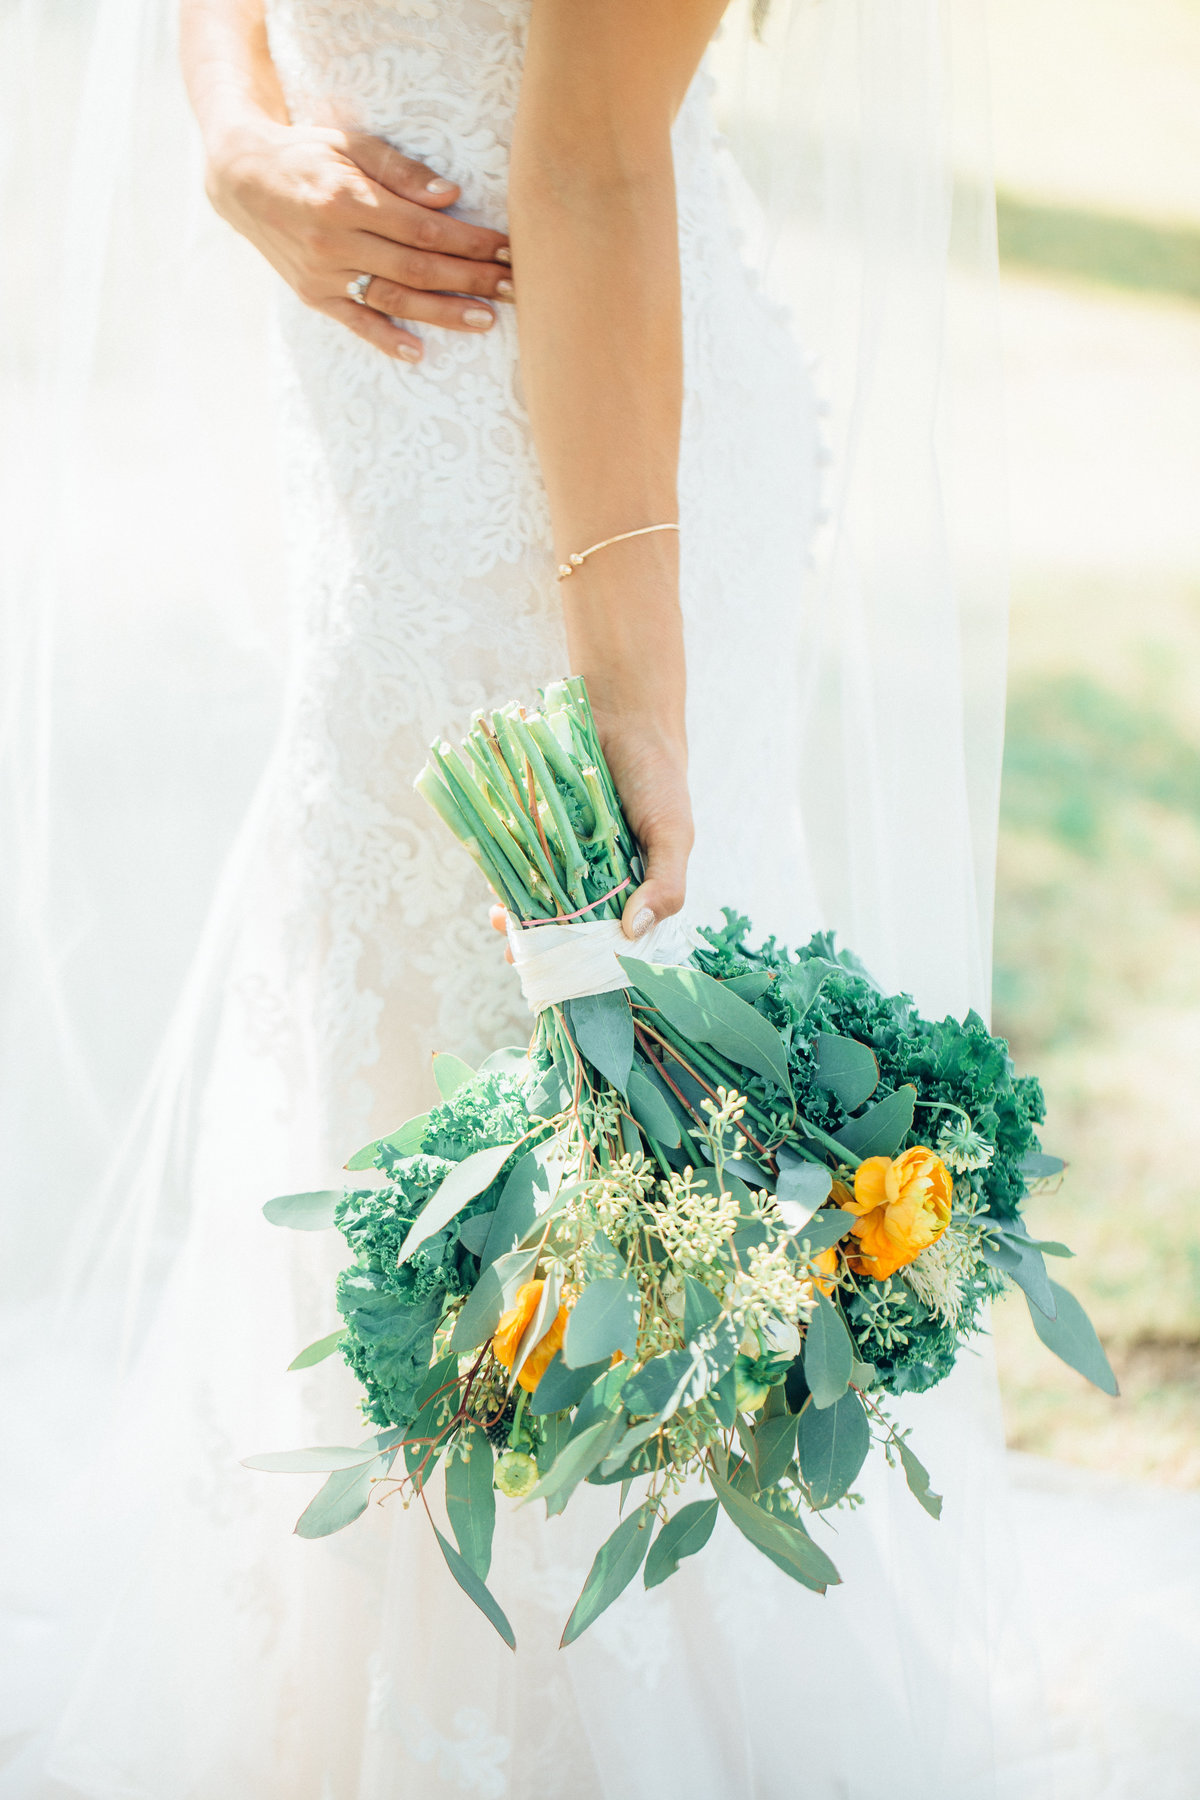 Wedding Photograph Of Bride In White Wedding Gown Showing a Bouquet Of Flowers Los Angeles